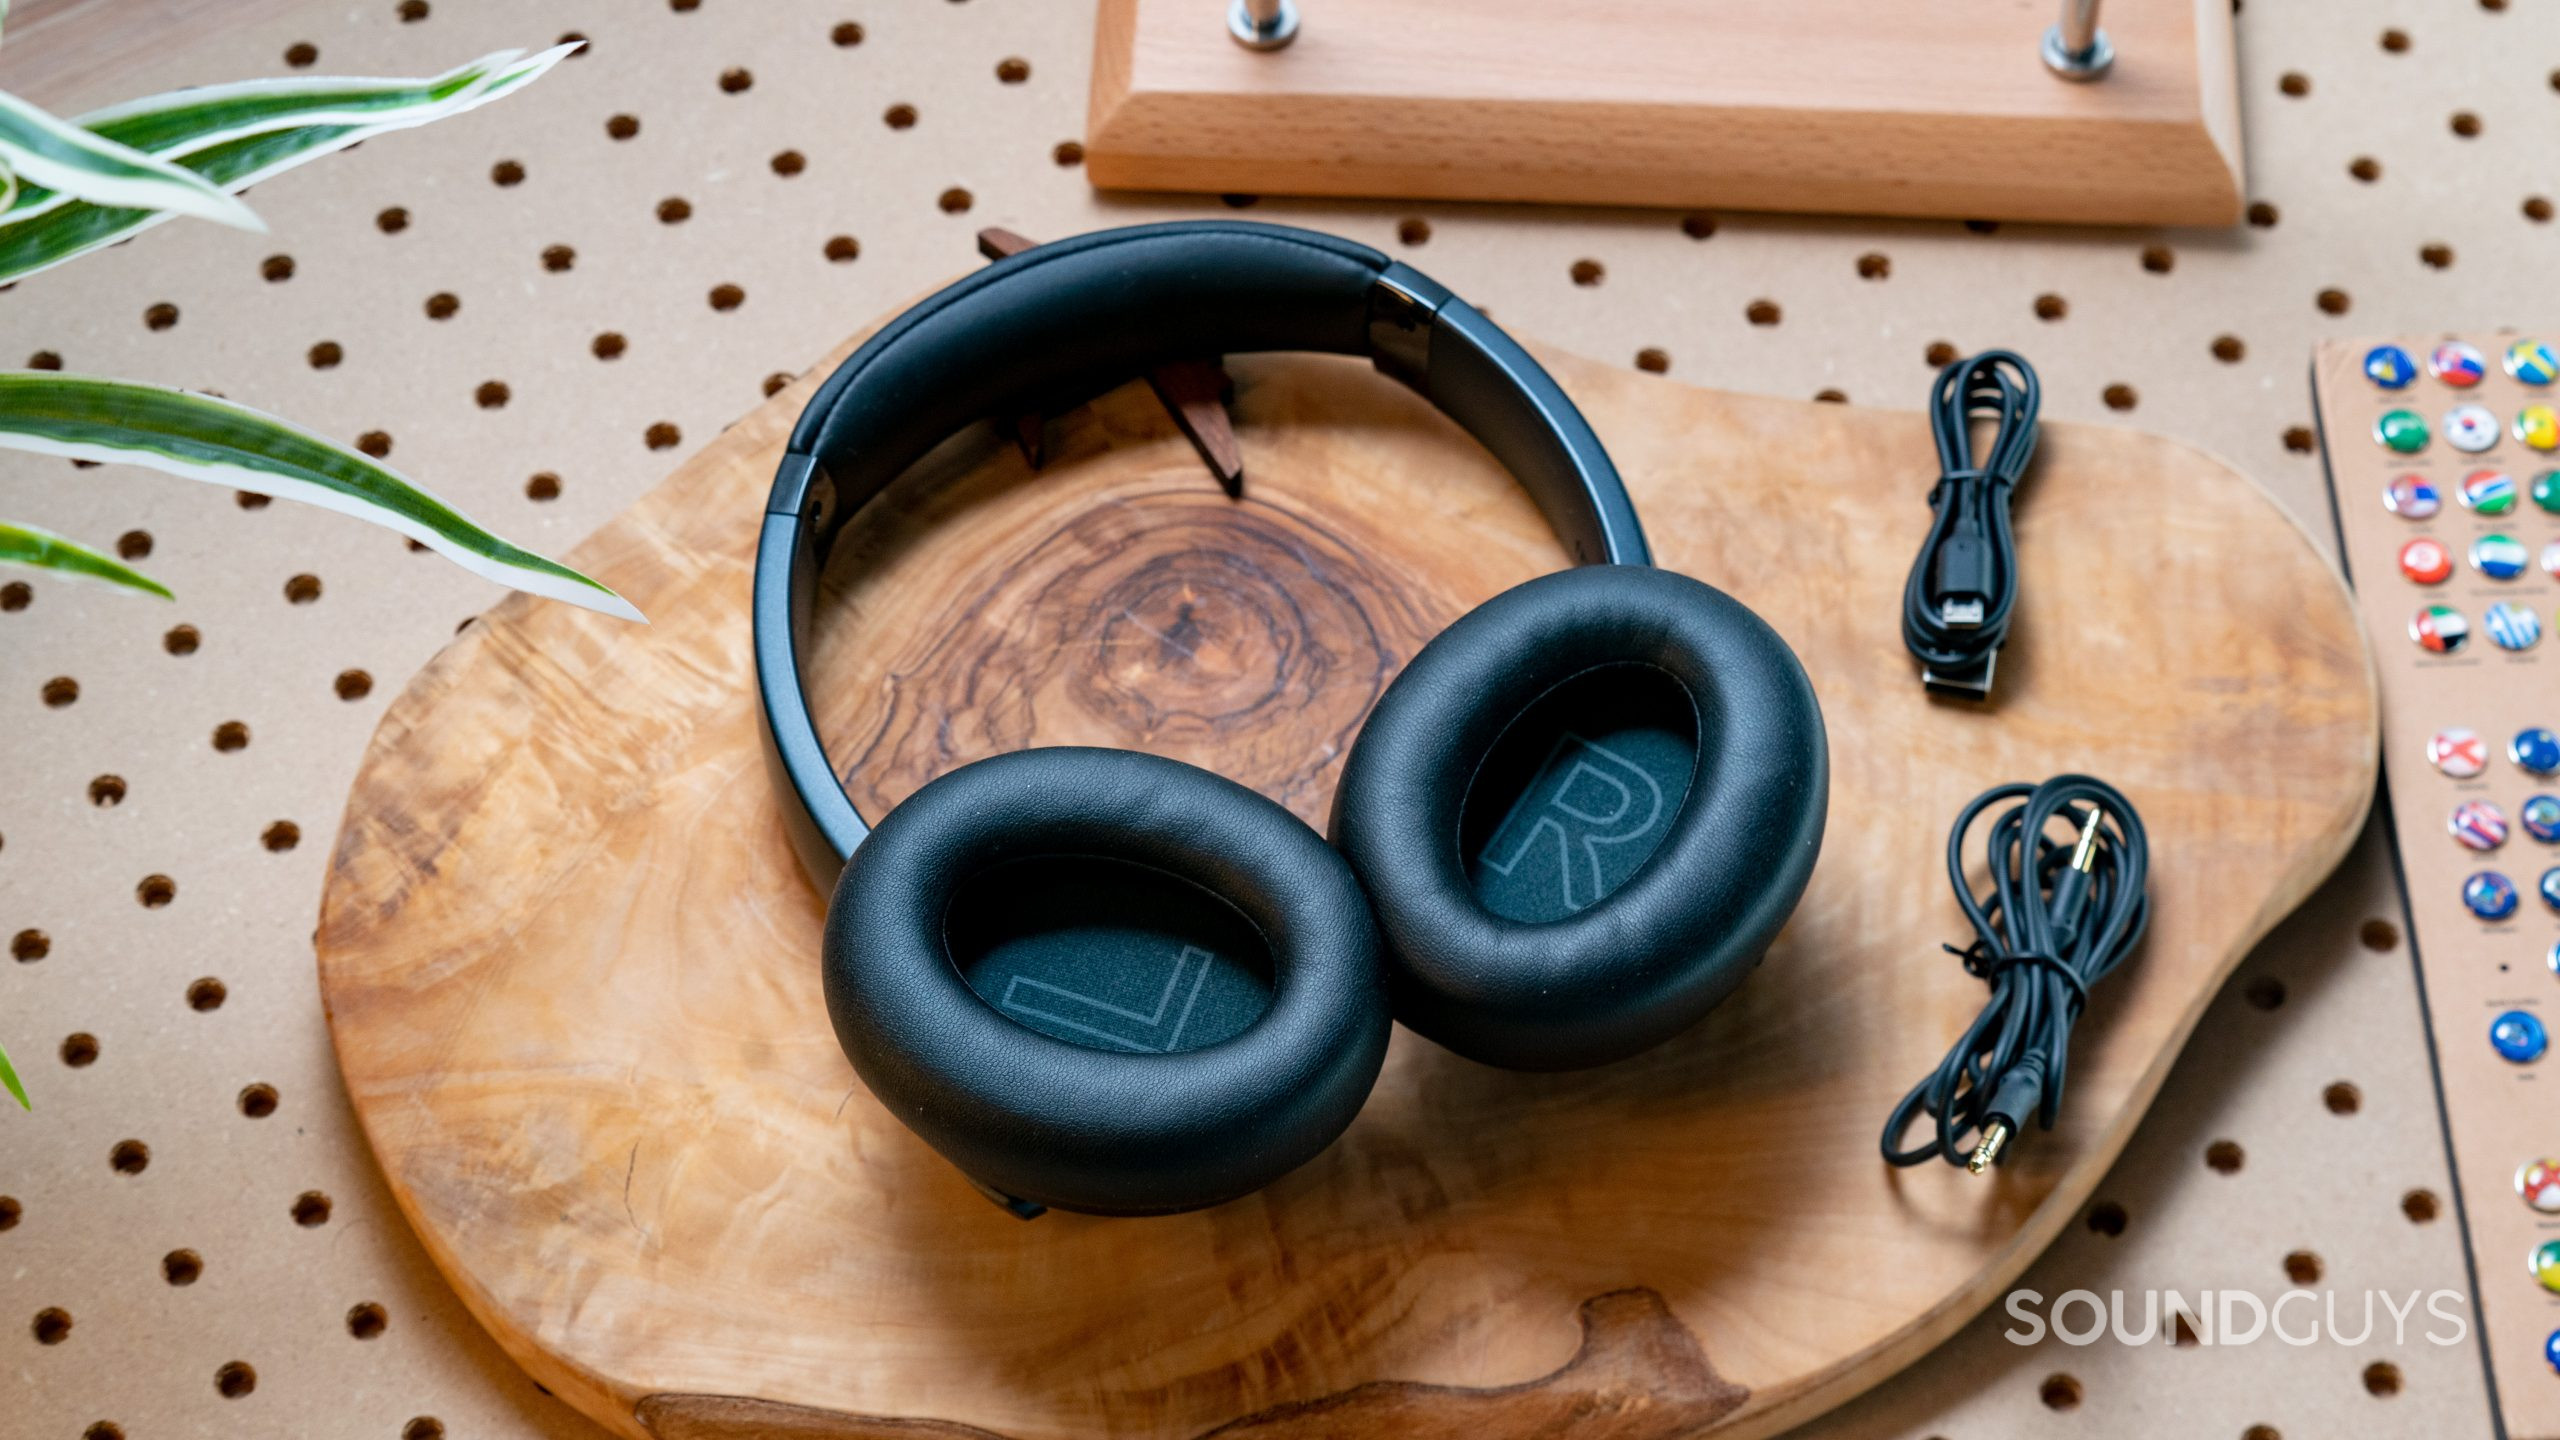 The Anker Soundcore Life Q20 headset in full with the ear cups facing upward while resting on a wood surface.